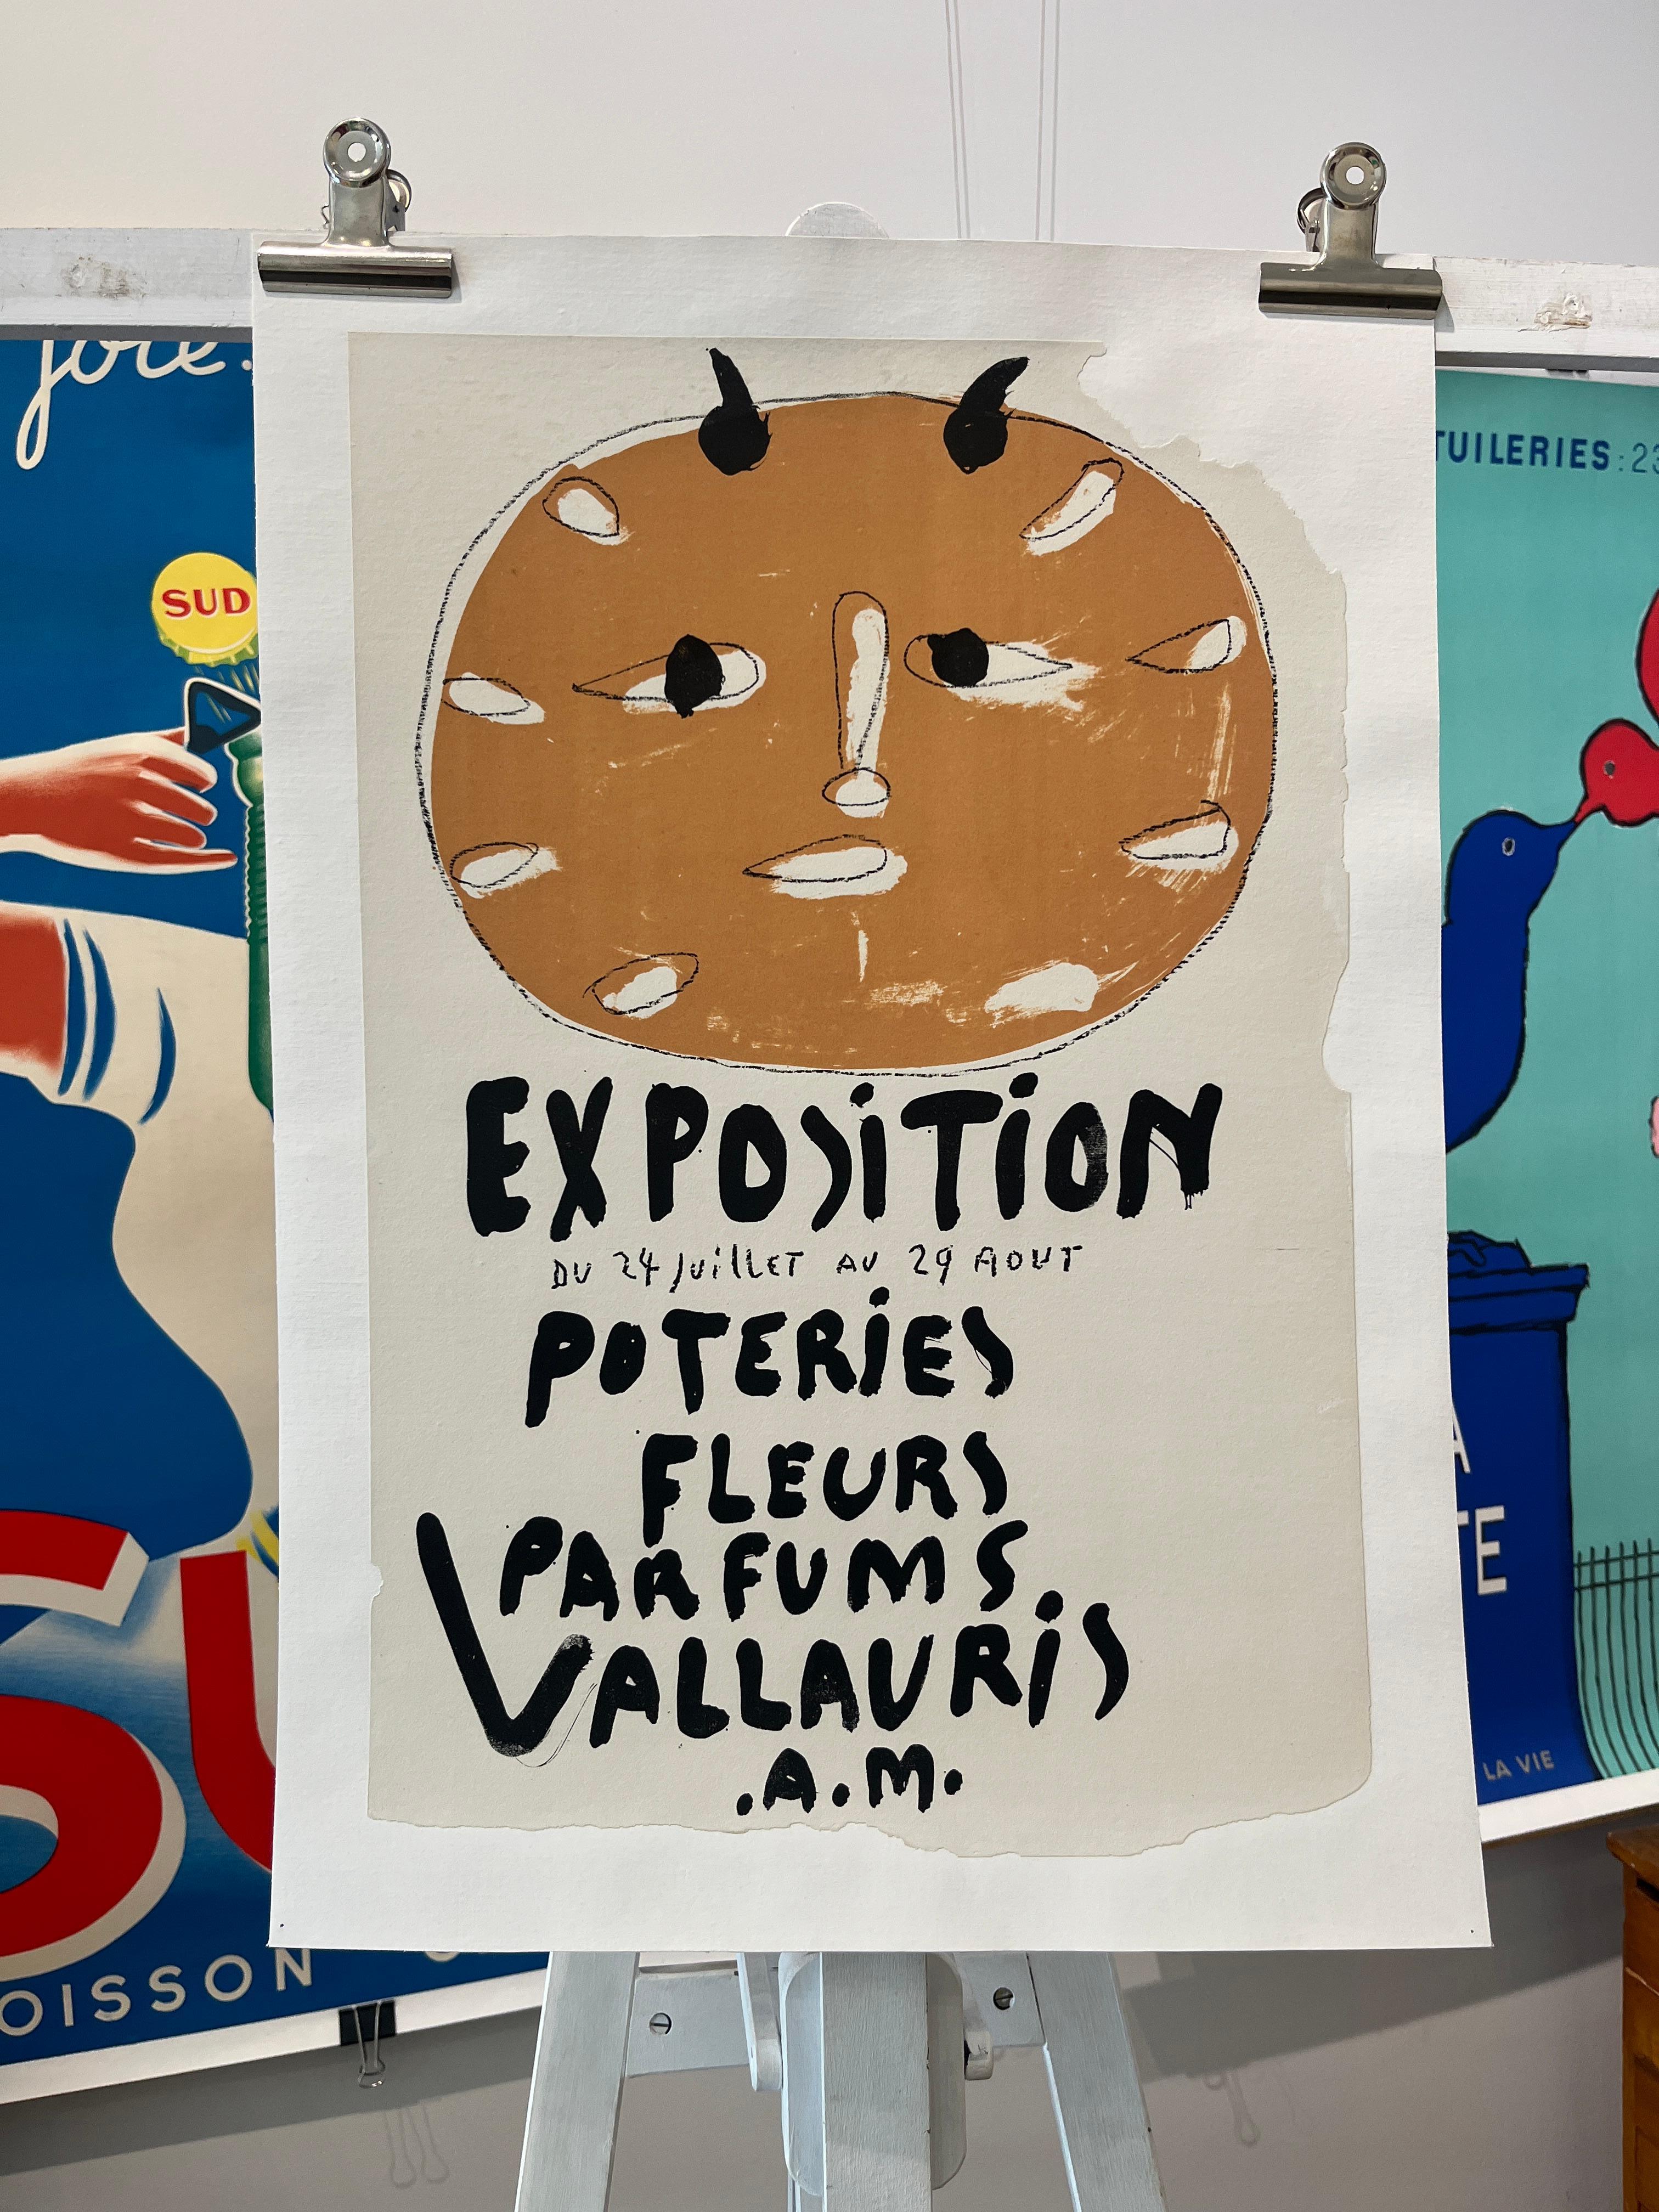 Exposition Poteries, Fleurs, Parfums no. 1 Original Vintage Poster
PICASSO EXPOSITION POTERIES FLEURS PARFUMS (NO. 1)

Poster created by Picasso for his exhibition ‘Poteries, Fleurs, Parfum’, for the Vallauris Fair. This is an original poster which